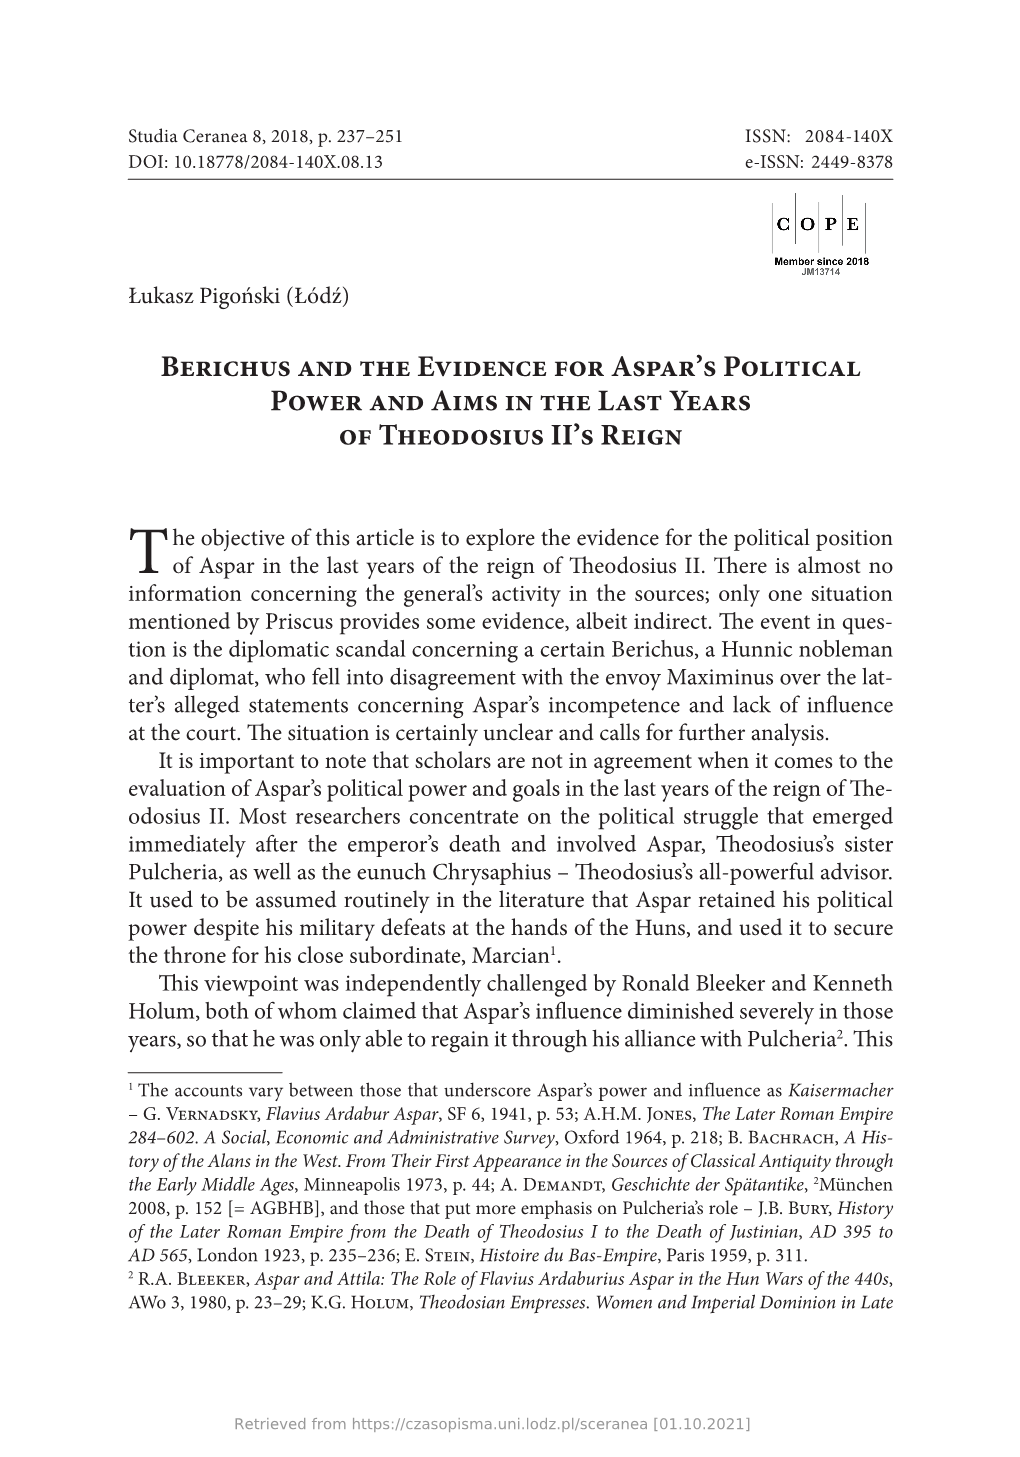 Berichus and the Evidence for Aspar's Political Power and Aims in the Last Years of Theodosius II's Reign